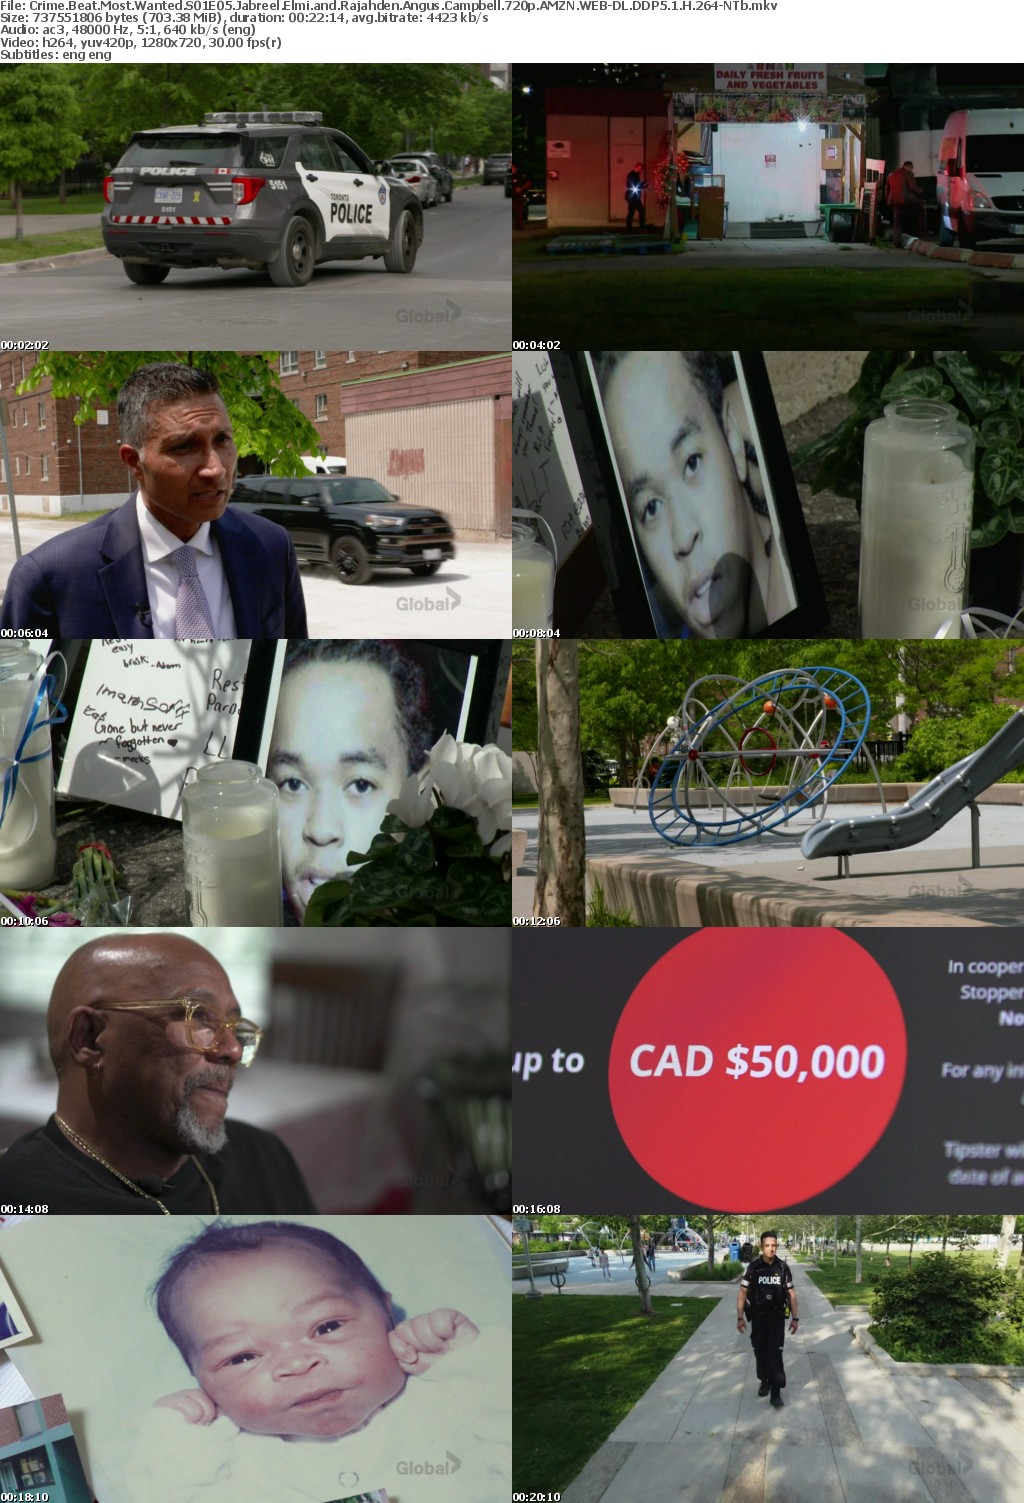 Crime Beat Most Wanted S01E05 Jabreel Elmi and Rajahden Angus Campbell 720p AMZN WEB-DL DDP5 1 H 264-NTb